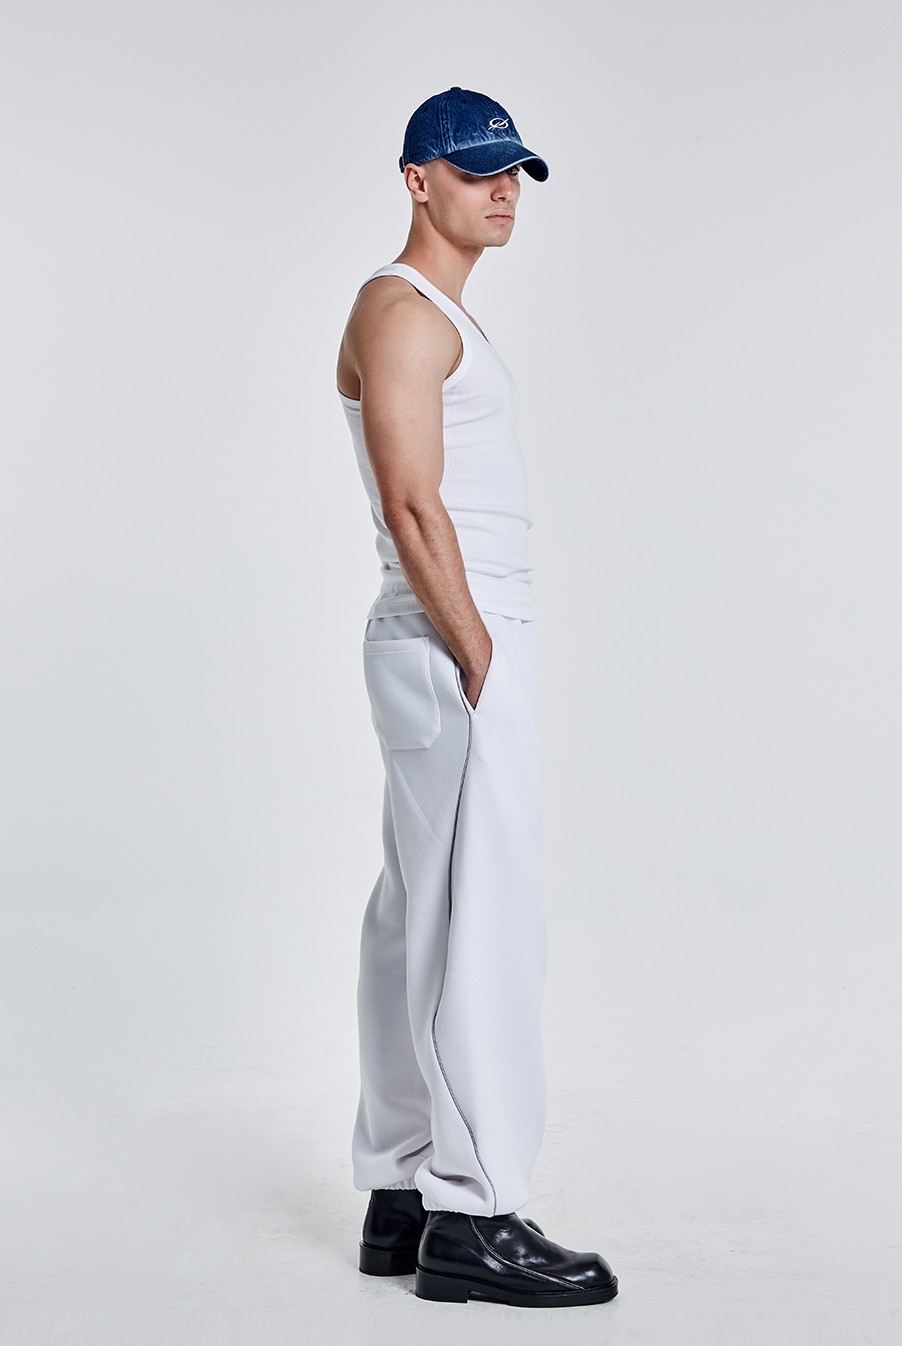 Tunnel Lining sweatpants - White